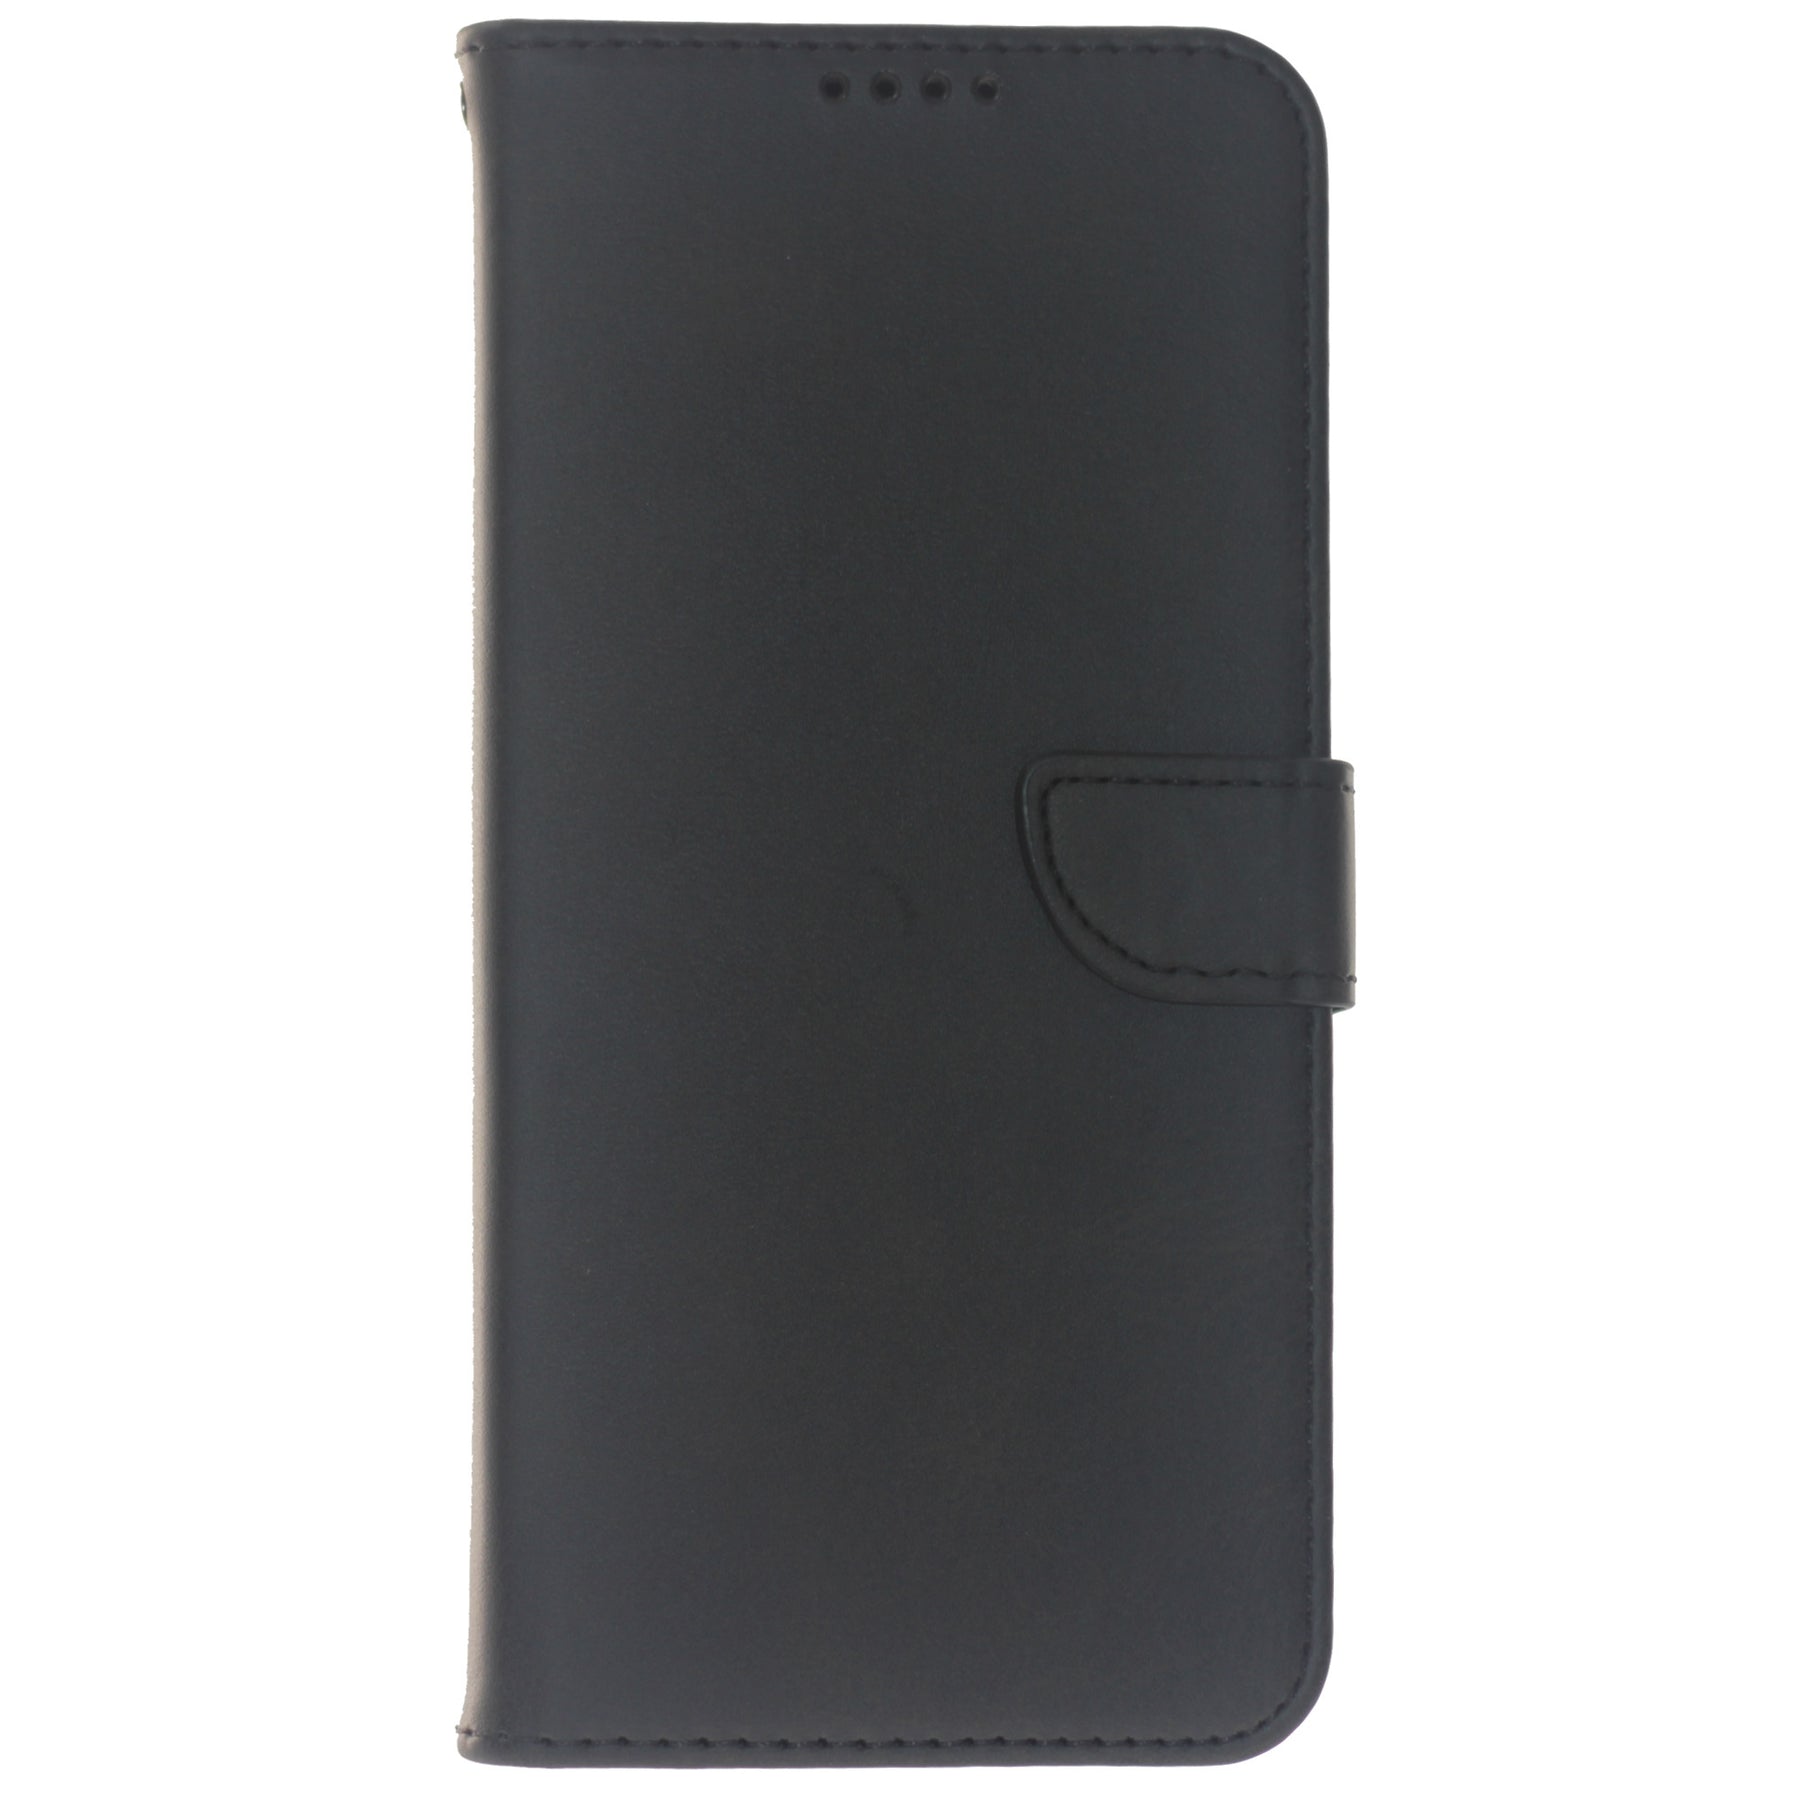 Oppo Reno 4 Pro 5G, Leather Wallet Case, Color Black